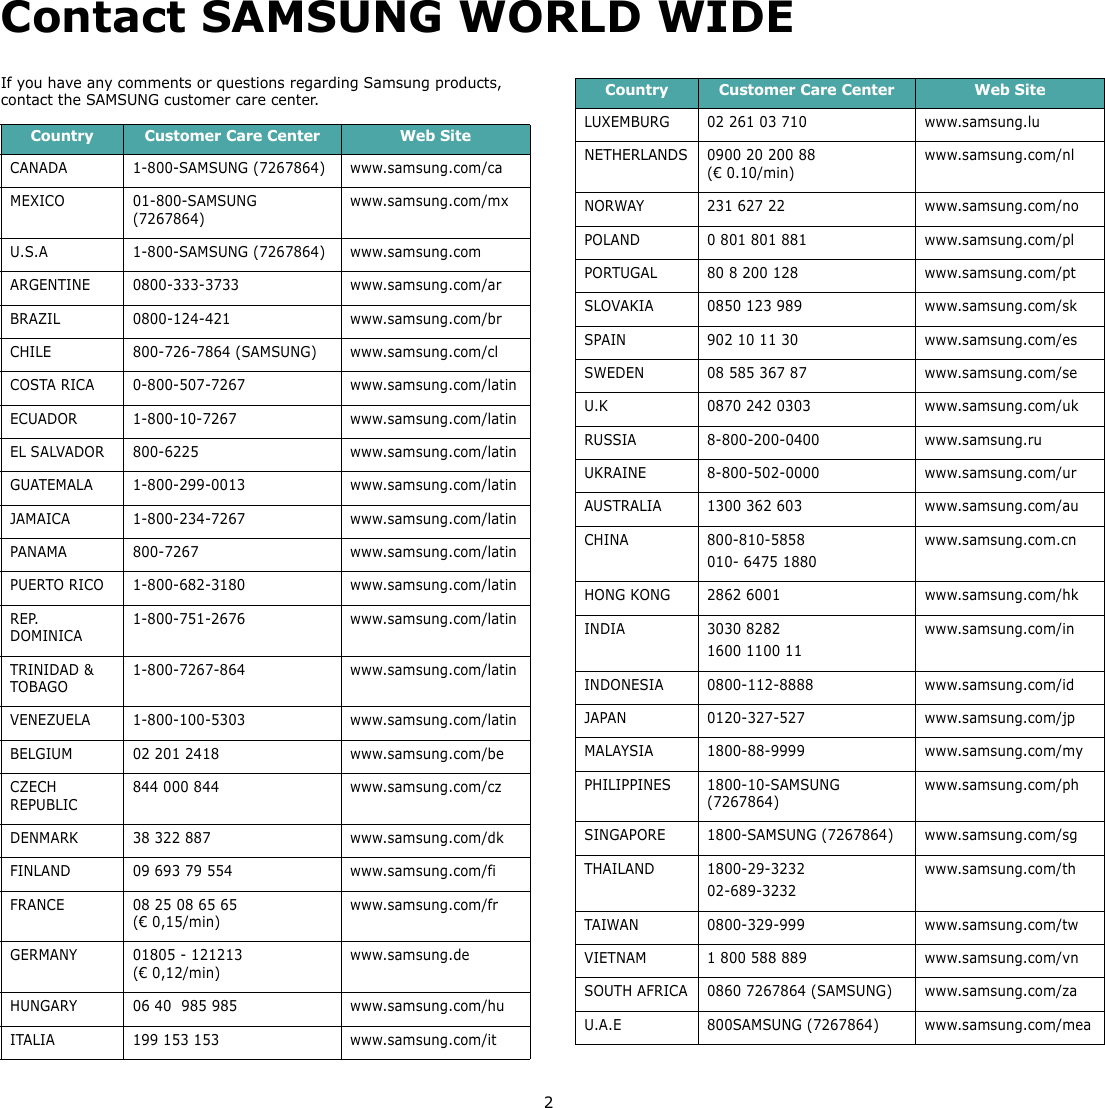 2Contact SAMSUNG WORLD WIDEIf you have any comments or questions regarding Samsung products, contact the SAMSUNG customer care center. Country Customer Care Center  Web SiteCANADA 1-800-SAMSUNG (7267864) www.samsung.com/caMEXICO 01-800-SAMSUNG (7267864)www.samsung.com/mxU.S.A 1-800-SAMSUNG (7267864) www.samsung.comARGENTINE 0800-333-3733 www.samsung.com/arBRAZIL 0800-124-421 www.samsung.com/brCHILE 800-726-7864 (SAMSUNG) www.samsung.com/clCOSTA RICA 0-800-507-7267 www.samsung.com/latinECUADOR 1-800-10-7267 www.samsung.com/latinEL SALVADOR 800-6225 www.samsung.com/latinGUATEMALA 1-800-299-0013 www.samsung.com/latinJAMAICA 1-800-234-7267 www.samsung.com/latinPANAMA 800-7267 www.samsung.com/latinPUERTO RICO 1-800-682-3180 www.samsung.com/latinREP. DOMINICA1-800-751-2676 www.samsung.com/latinTRINIDAD &amp; TOBAGO1-800-7267-864 www.samsung.com/latinVENEZUELA 1-800-100-5303 www.samsung.com/latinBELGIUM 02 201 2418 www.samsung.com/beCZECH REPUBLIC844 000 844 www.samsung.com/czDENMARK 38 322 887 www.samsung.com/dkFINLAND 09 693 79 554 www.samsung.com/fiFRANCE 08 25 08 65 65 (€ 0,15/min)www.samsung.com/frGERMANY 01805 - 121213 (€ 0,12/min)www.samsung.deHUNGARY 06 40  985 985 www.samsung.com/huITALIA 199 153 153 www.samsung.com/itLUXEMBURG 02 261 03 710 www.samsung.luNETHERLANDS0900 20 200 88(€ 0.10/min)www.samsung.com/nlNORWAY 231 627 22 www.samsung.com/noPOLAND 0 801 801 881 www.samsung.com/plPORTUGAL 80 8 200 128 www.samsung.com/ptSLOVAKIA 0850 123 989 www.samsung.com/skSPAIN 902 10 11 30 www.samsung.com/esSWEDEN 08 585 367 87 www.samsung.com/seU.K 0870 242 0303 www.samsung.com/ukRUSSIA 8-800-200-0400 www.samsung.ruUKRAINE 8-800-502-0000 www.samsung.com/urAUSTRALIA 1300 362 603 www.samsung.com/auCHINA 800-810-5858010- 6475 1880www.samsung.com.cnHONG KONG 2862 6001 www.samsung.com/hkINDIA 3030 82821600 1100 11www.samsung.com/inINDONESIA 0800-112-8888 www.samsung.com/idJAPAN 0120-327-527 www.samsung.com/jpMALAYSIA 1800-88-9999 www.samsung.com/myPHILIPPINES 1800-10-SAMSUNG (7267864)www.samsung.com/phSINGAPORE 1800-SAMSUNG (7267864) www.samsung.com/sgTHAILAND 1800-29-323202-689-3232www.samsung.com/thTAIWAN 0800-329-999 www.samsung.com/twVIETNAM 1 800 588 889 www.samsung.com/vnSOUTH AFRICA 0860 7267864 (SAMSUNG) www.samsung.com/zaU.A.E 800SAMSUNG (7267864) www.samsung.com/meaCountry Customer Care Center  Web Site